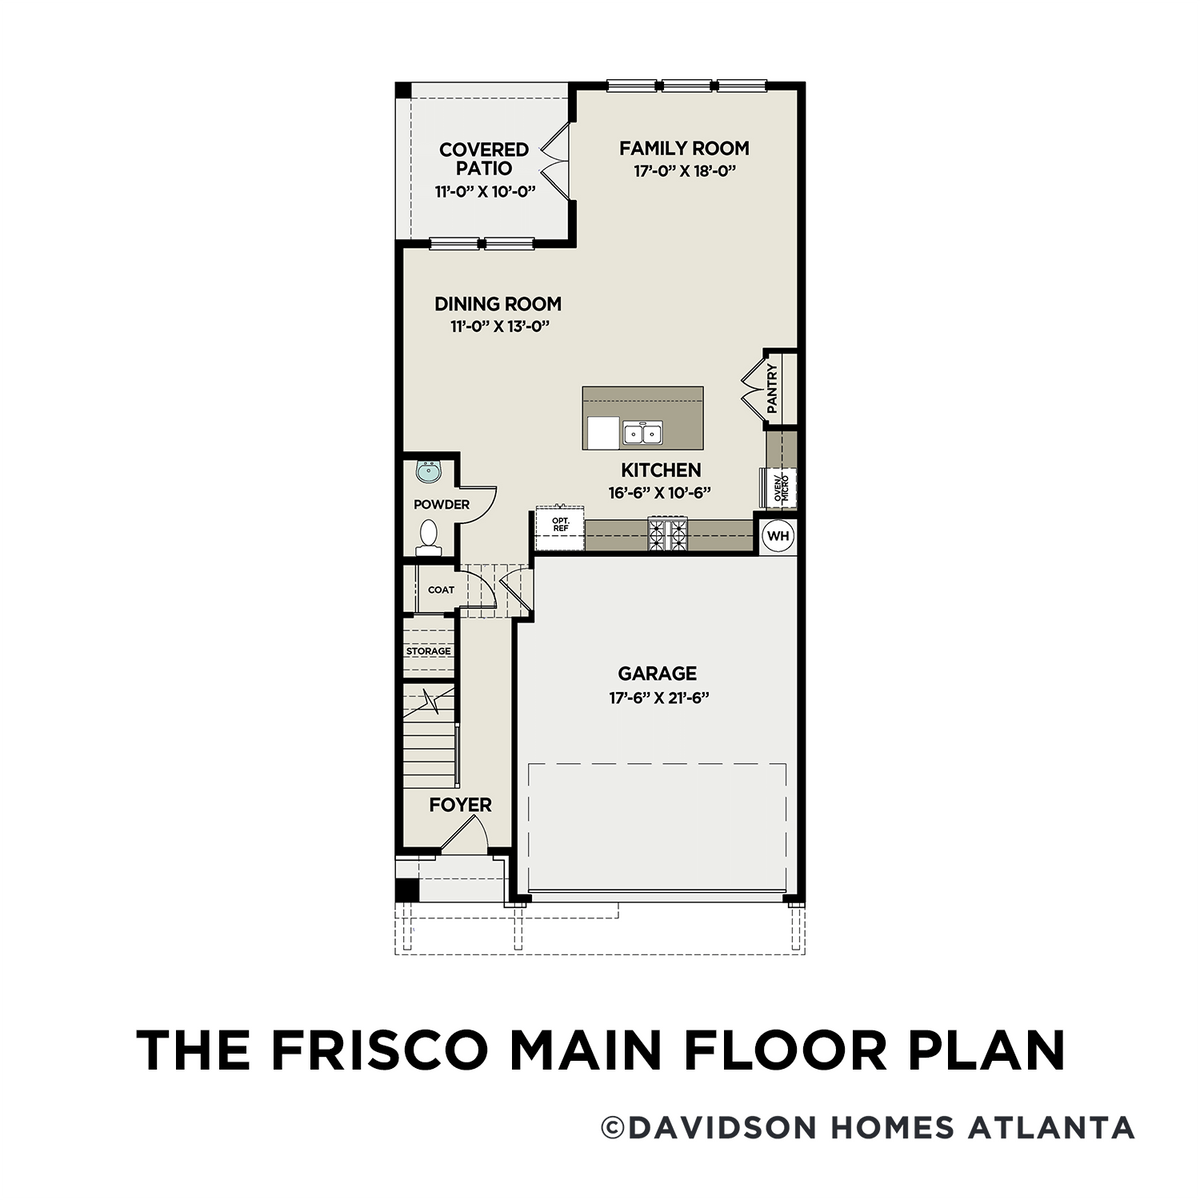 1 - The Frisco C floor plan layout for 695 Stickley Oak Way in Davidson Homes' The Village at Towne Lake community.